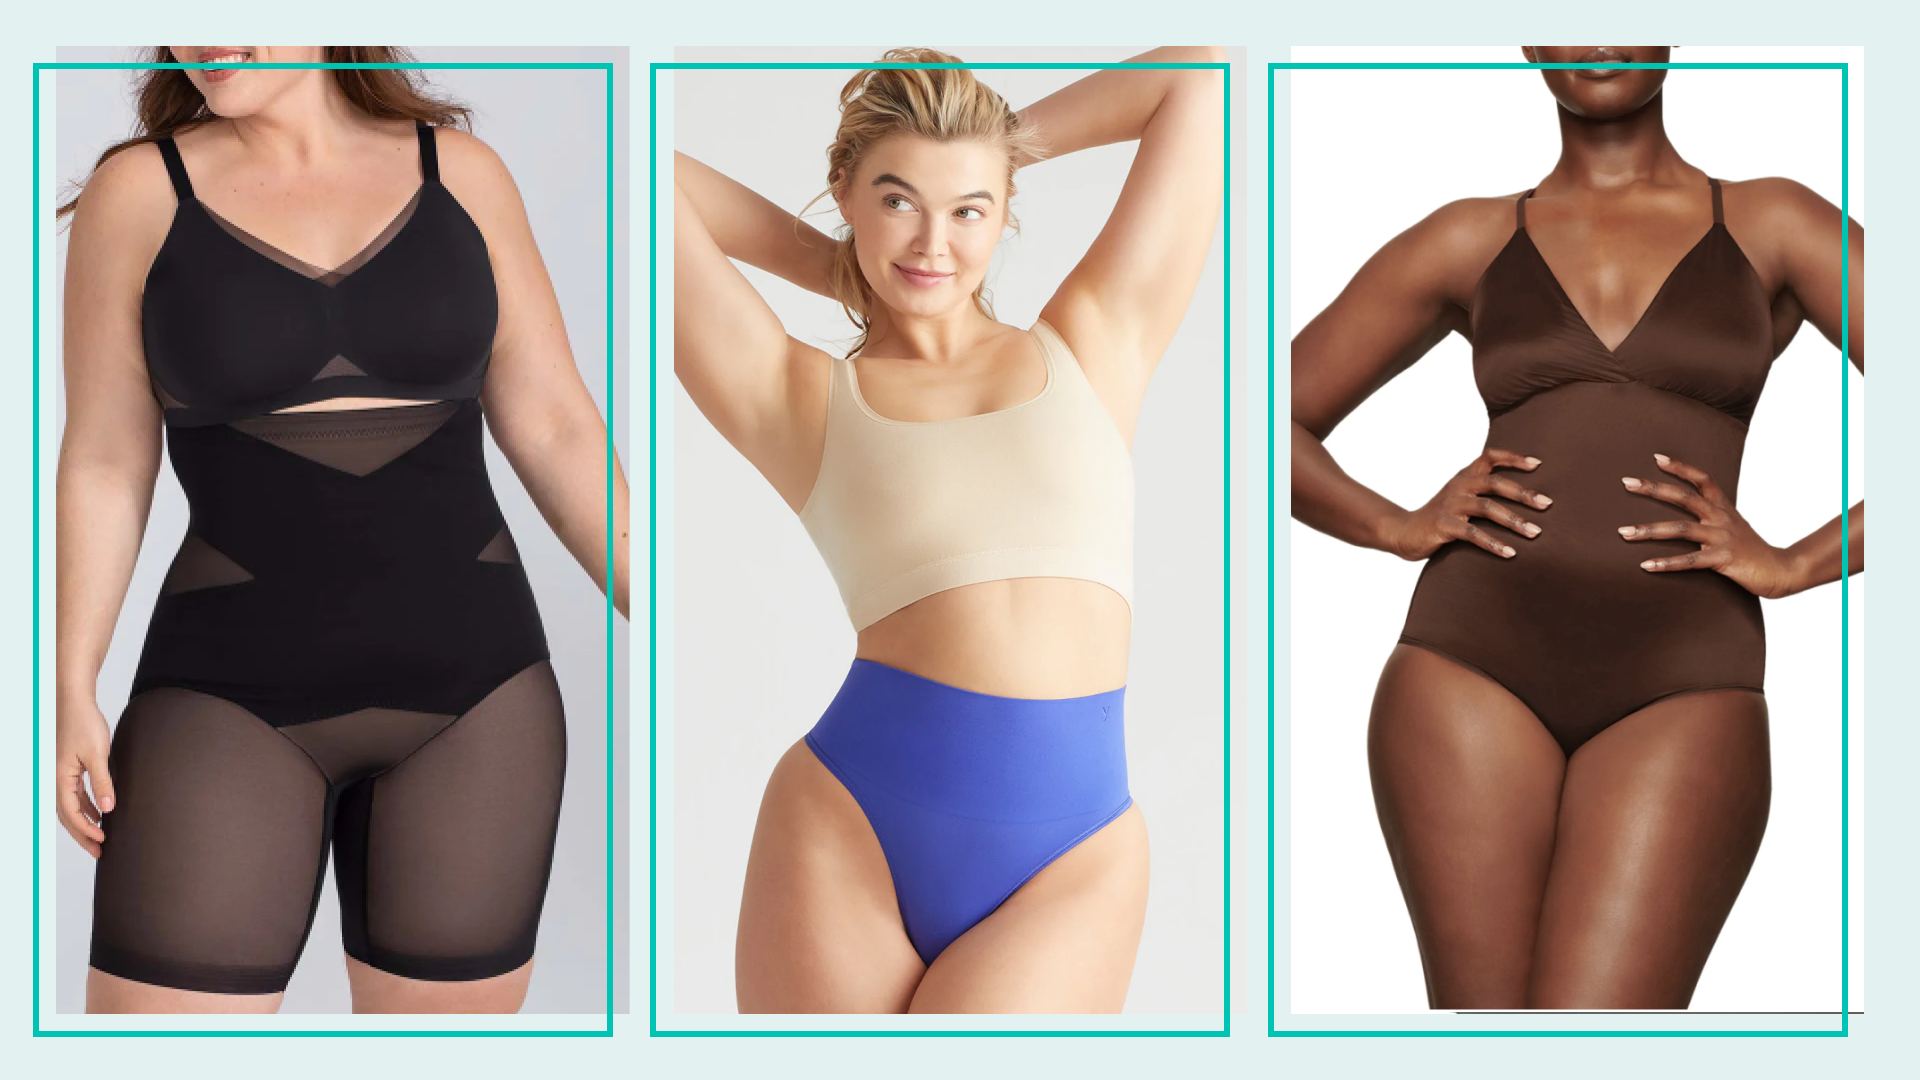 Our fave shapewear